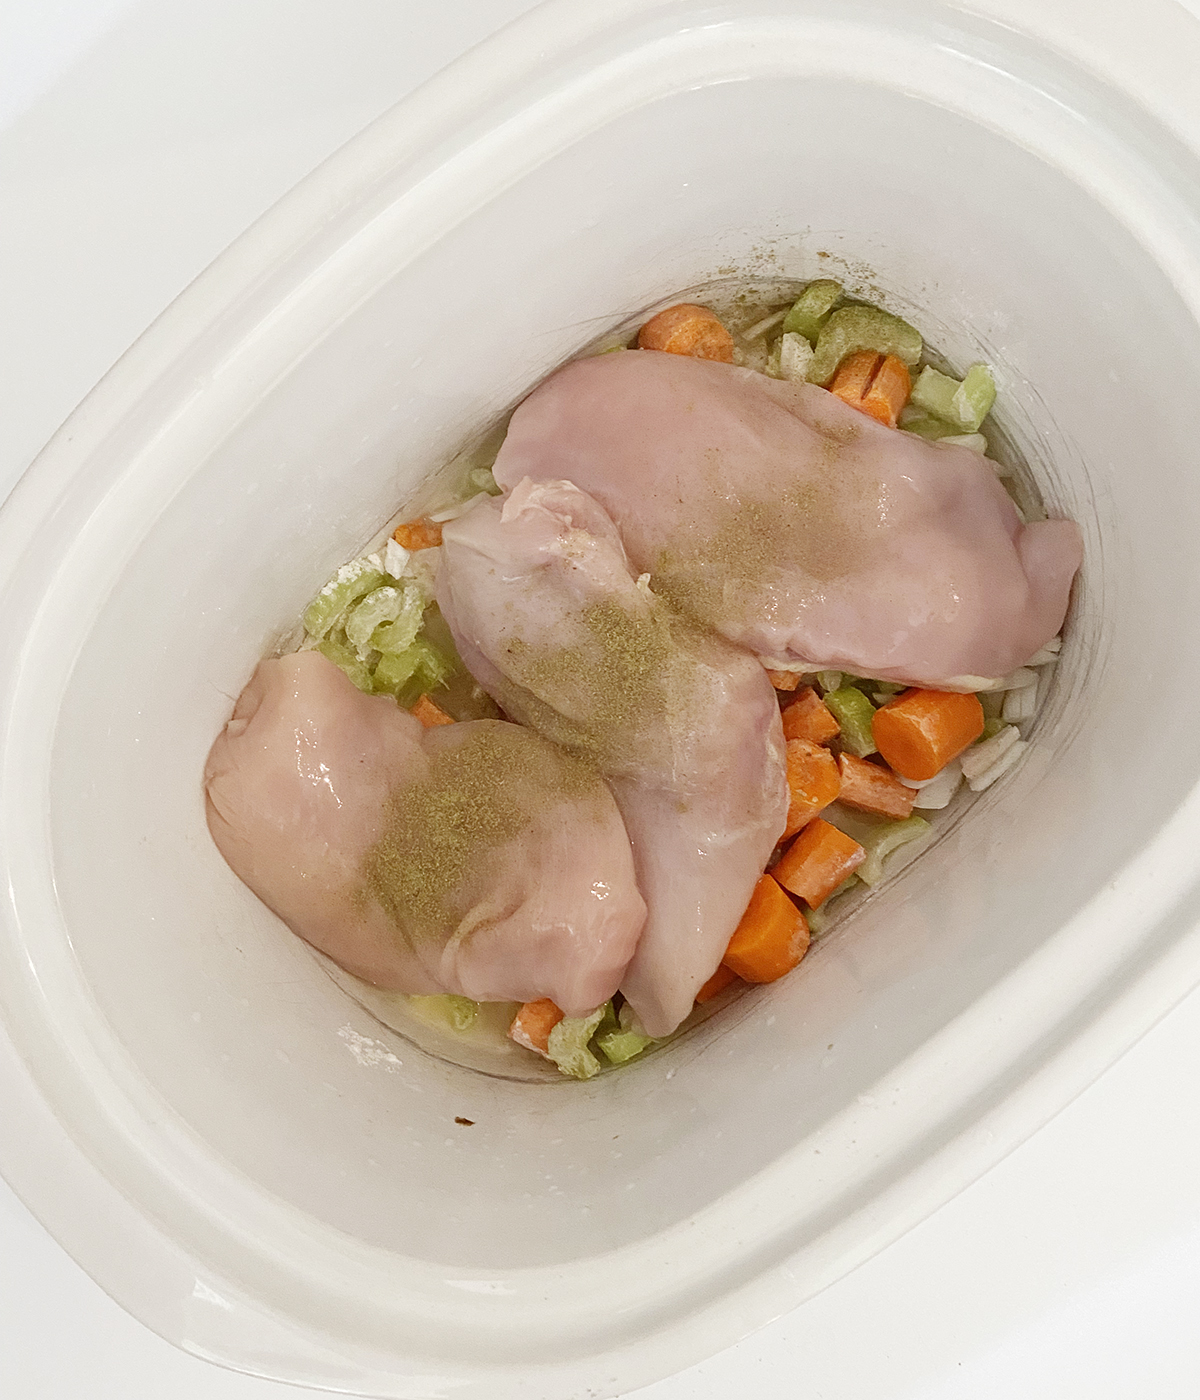 Chicken and vegetables in the slow cooker ready to be cooked.